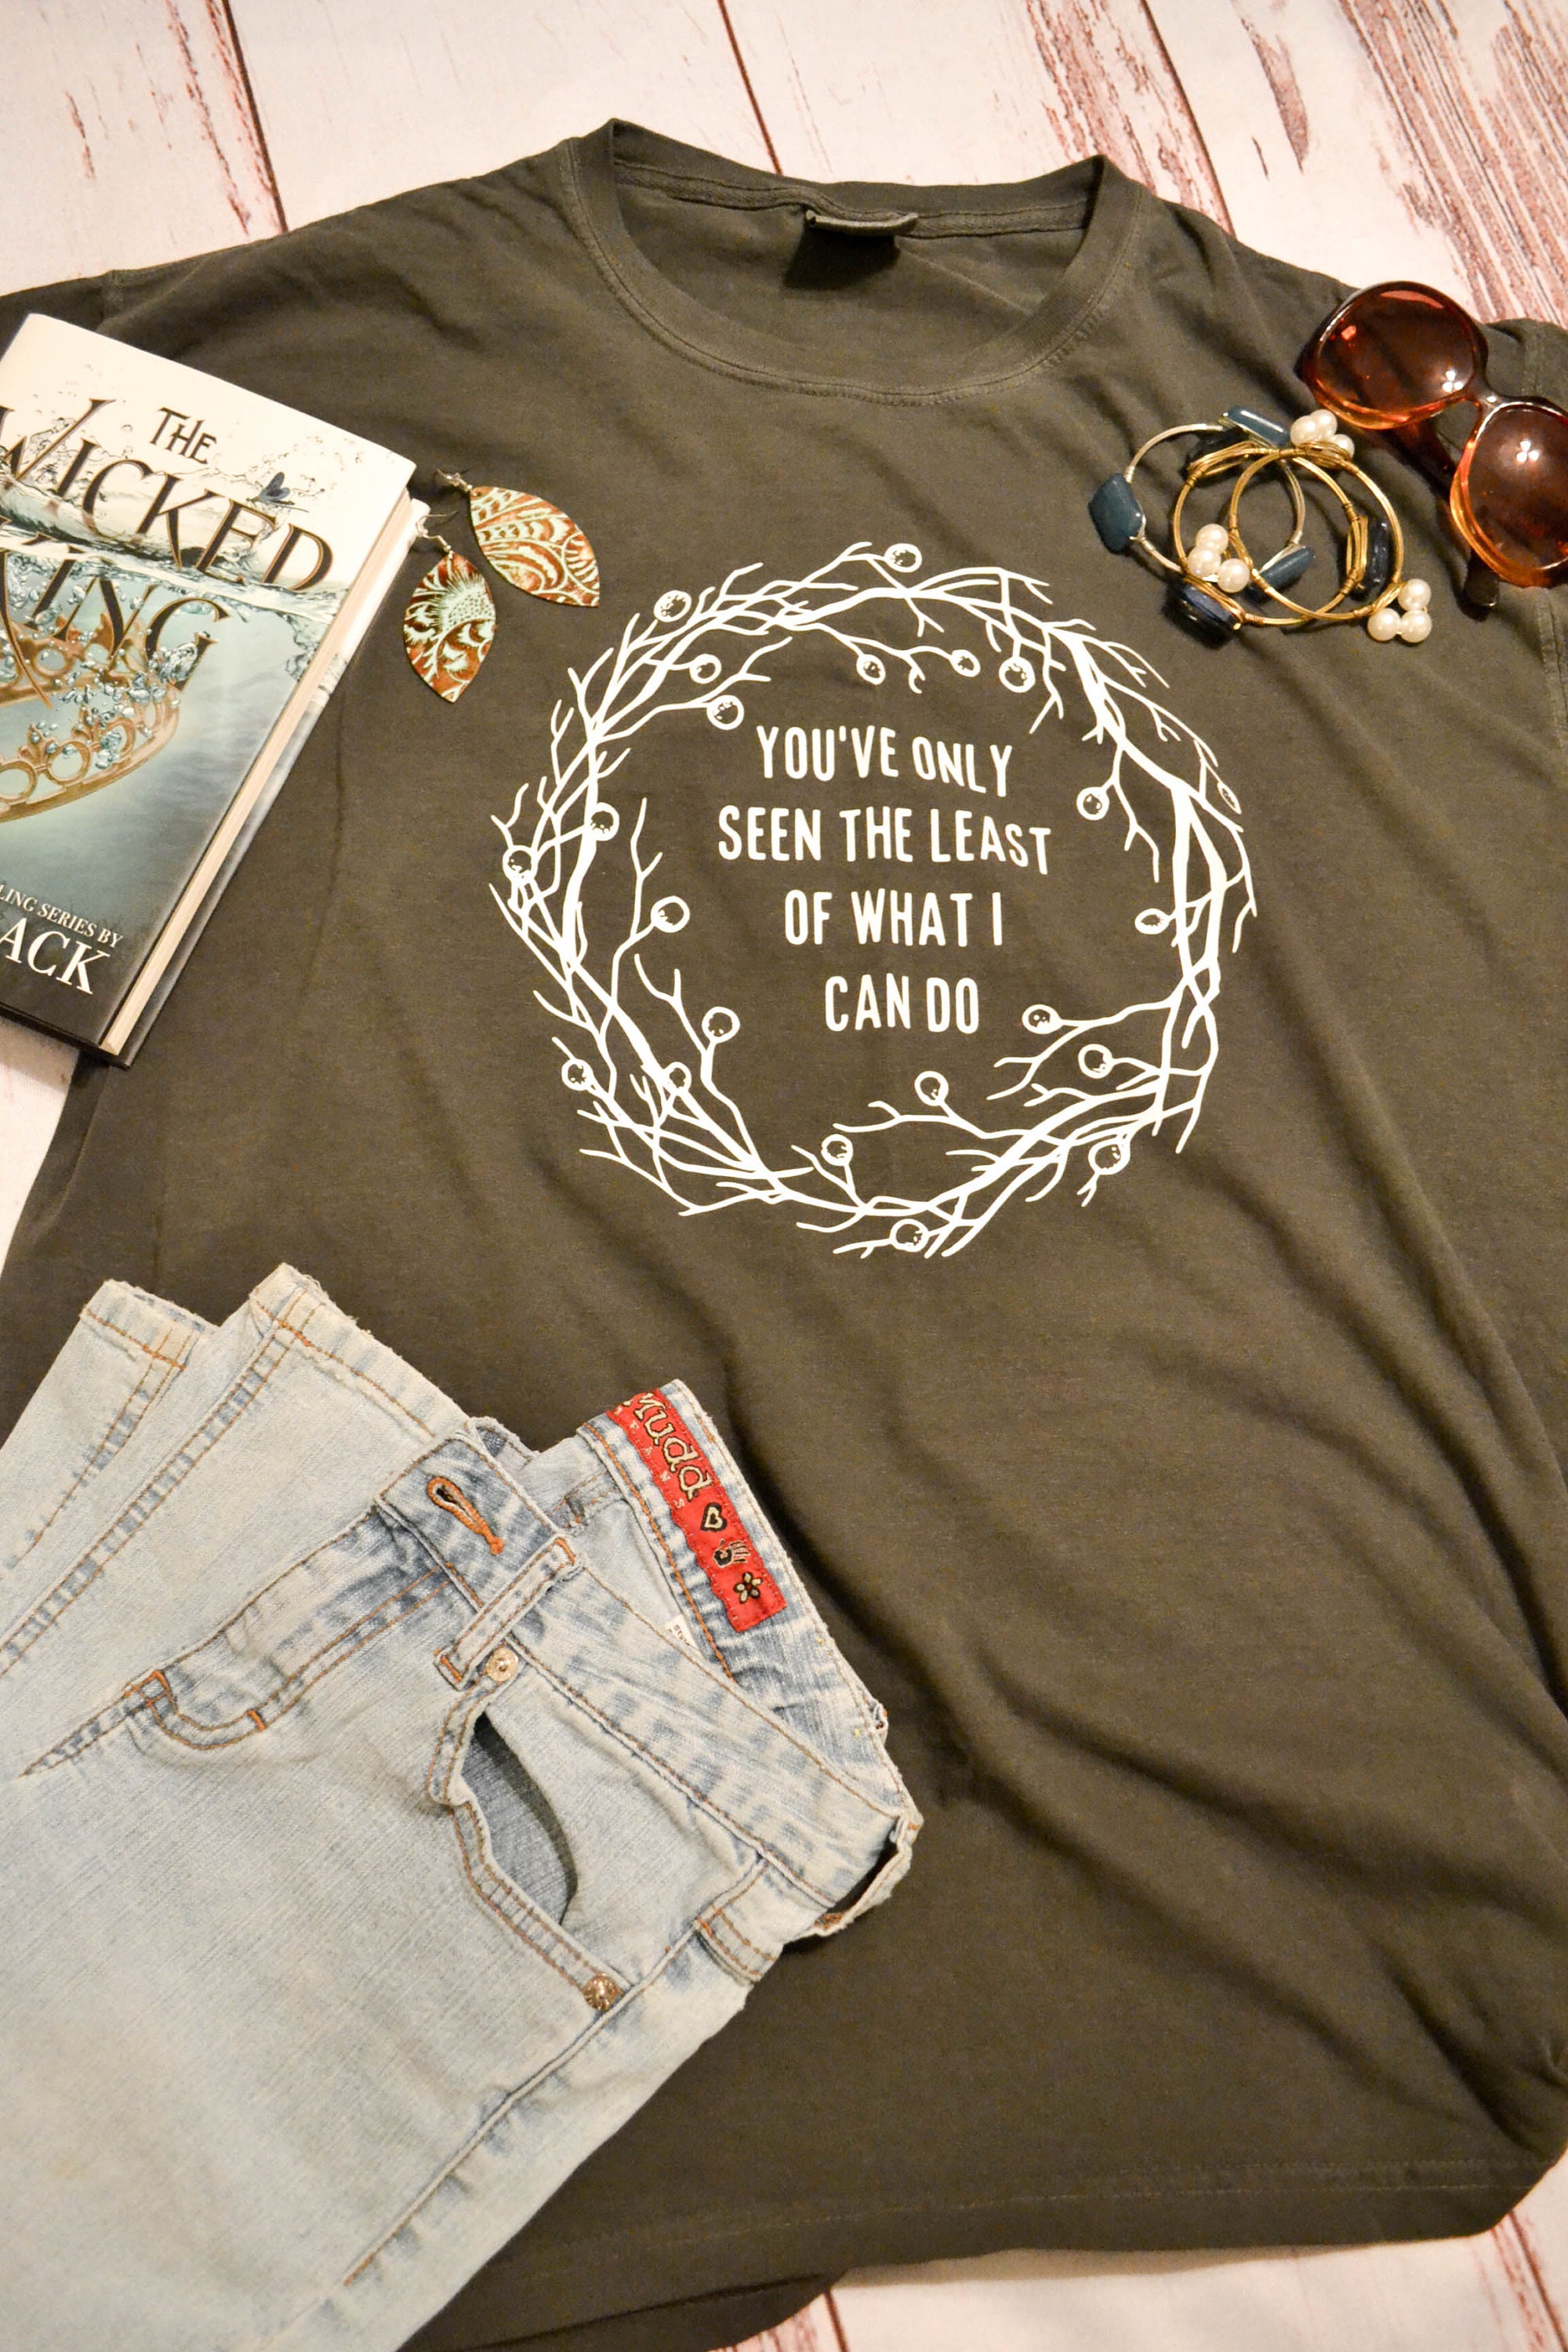 The Cruel Prince Shirt Bookish Shirt You've Only Seen - Etsy